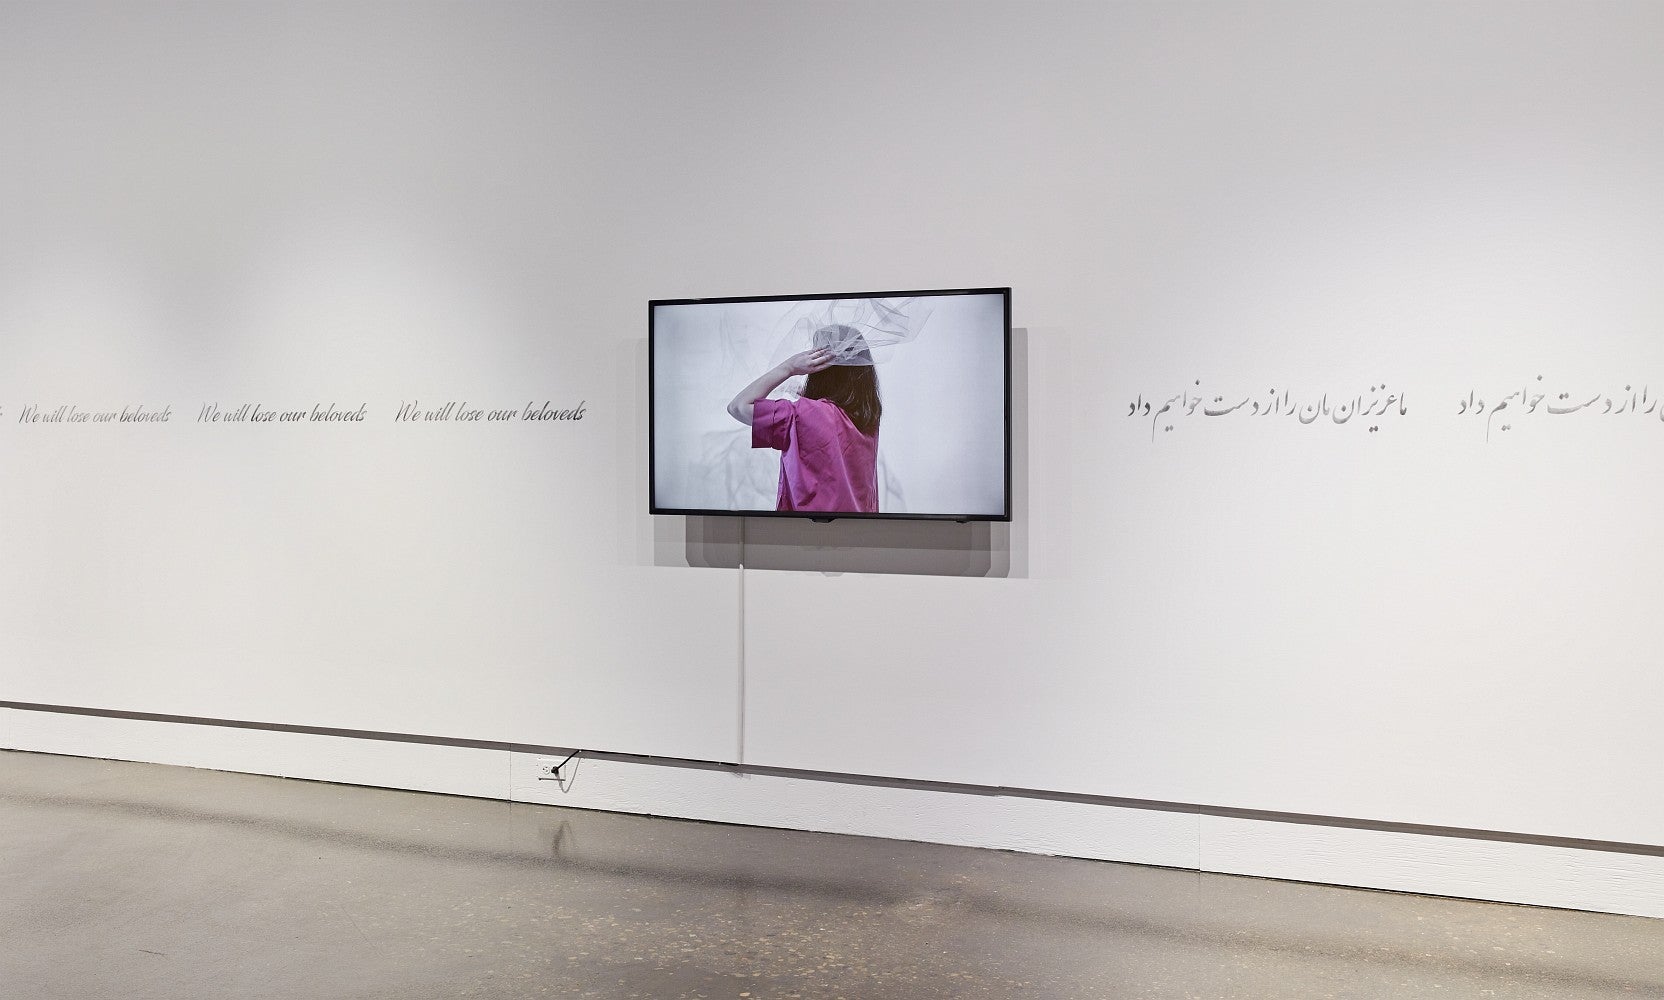 Art gallery exhibition with a video monitor and text in English (We will lose our beloveds) and Arabic running along the wall.